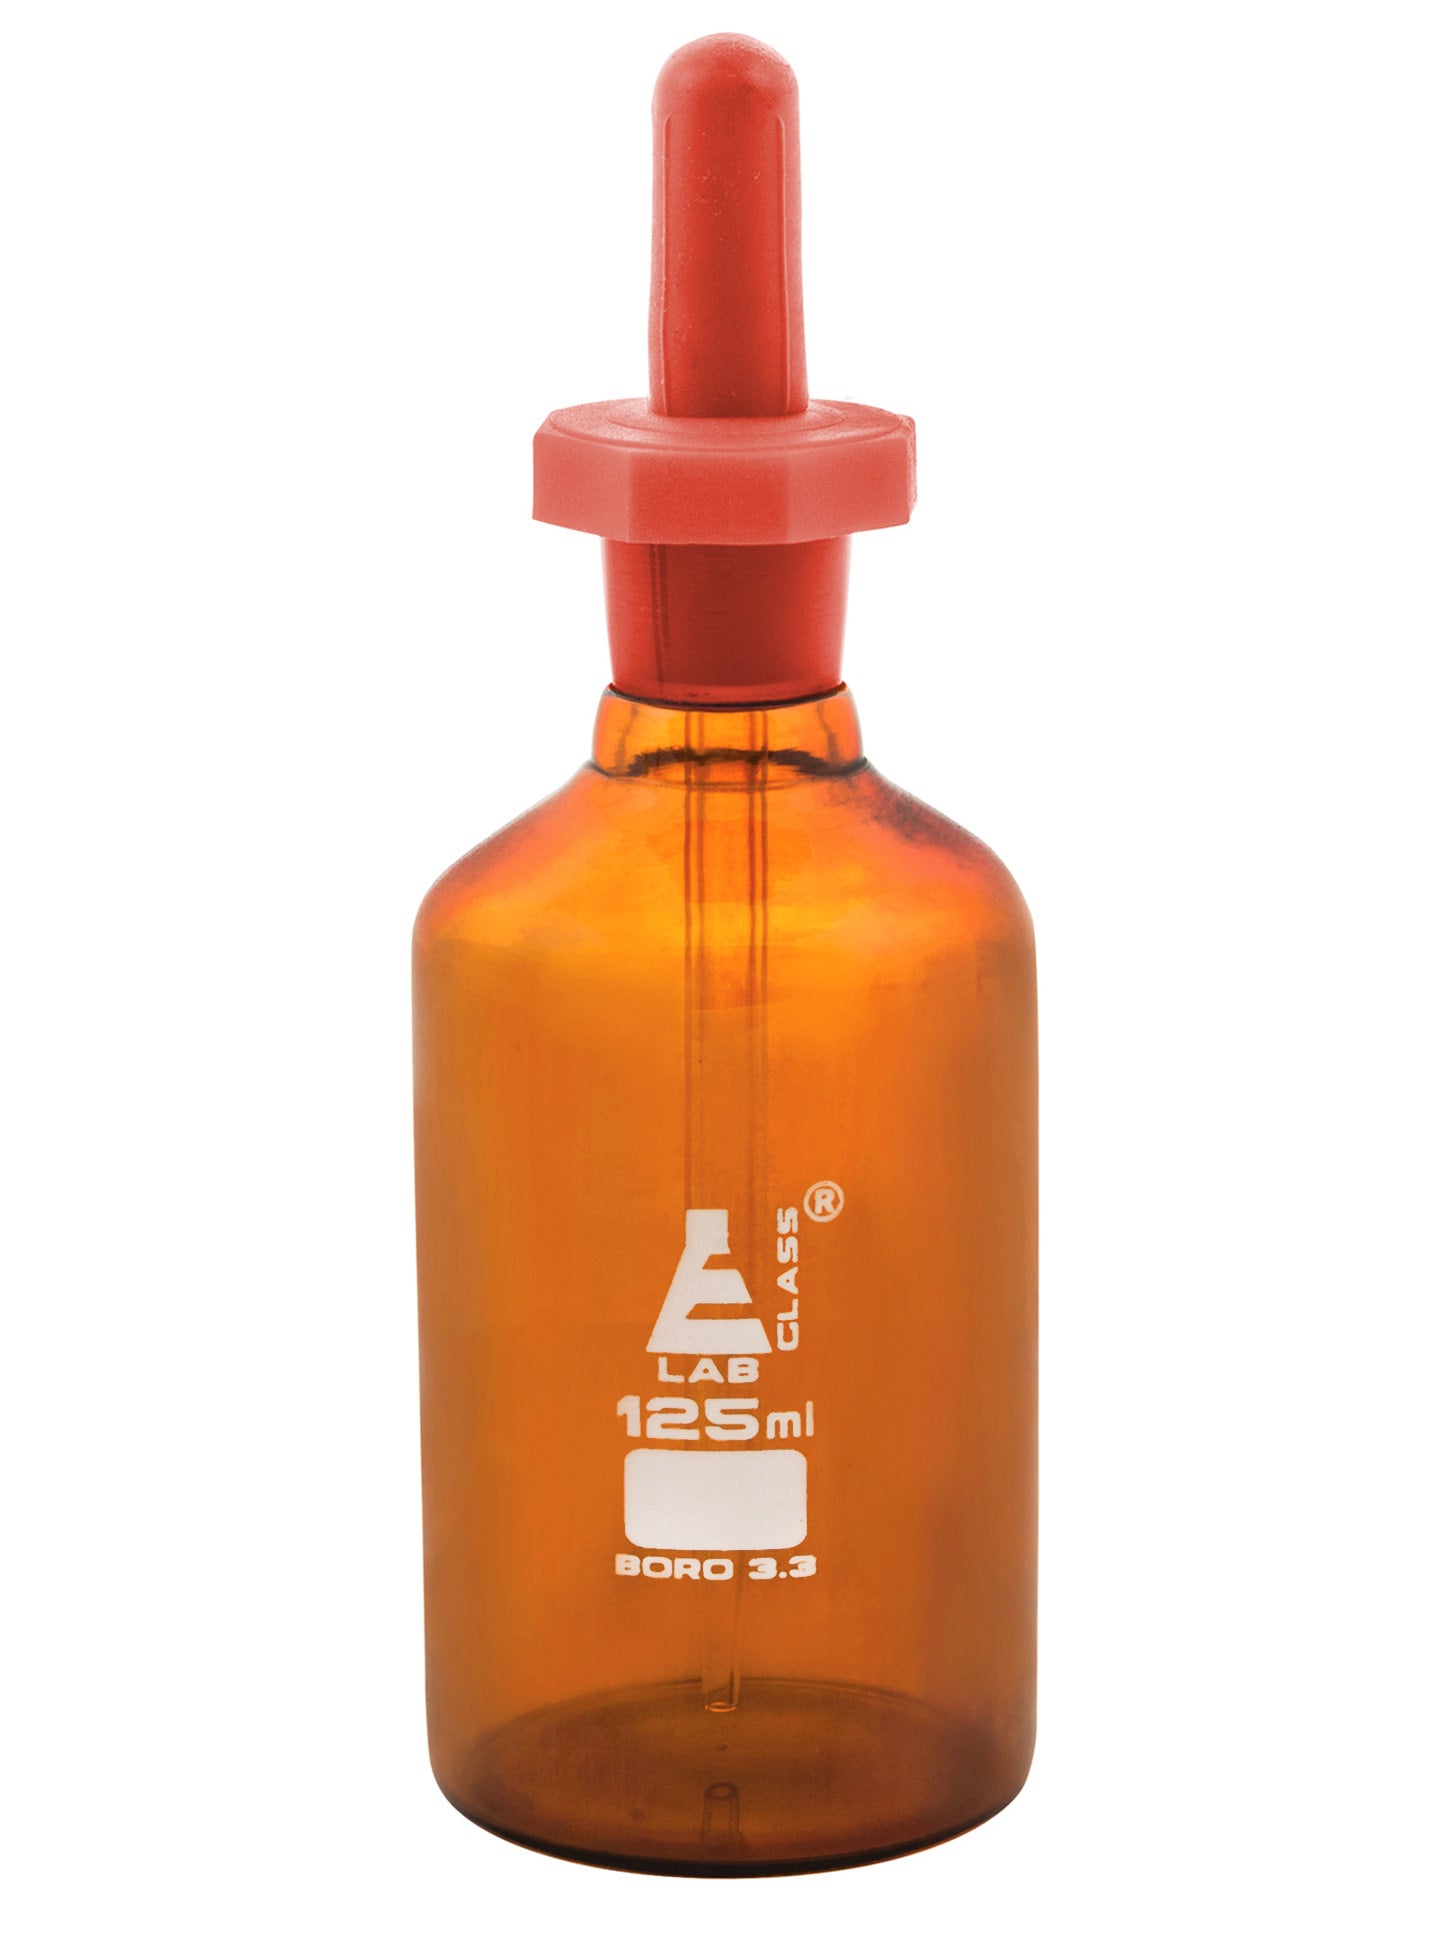 Amber Borosilicate Pipette Dropping Bottle, 125 ml, Autoclavable